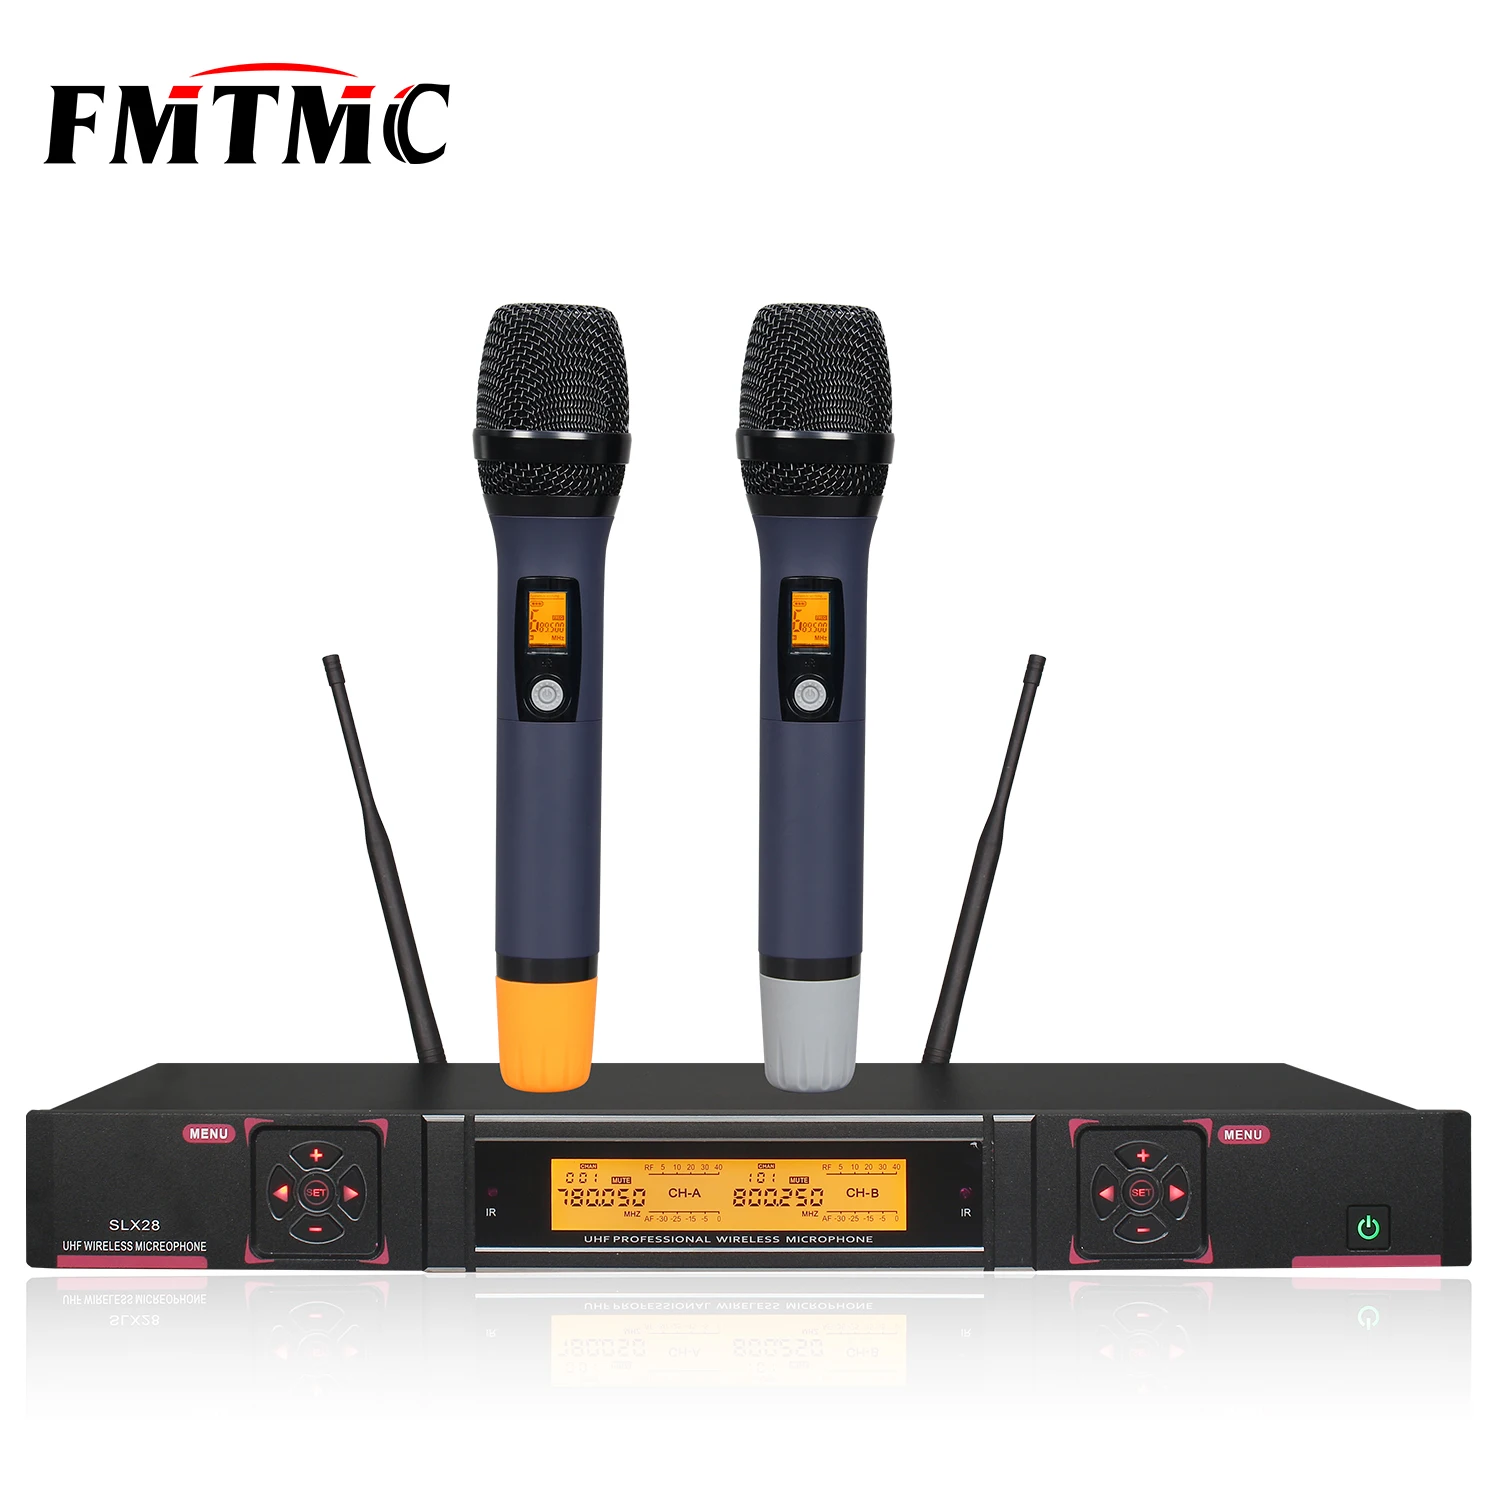 

Hot Sell KTV-M8 Wireless Karaoke Microphone Two Channels Handheld Good Sounds UHF Professional Microphone